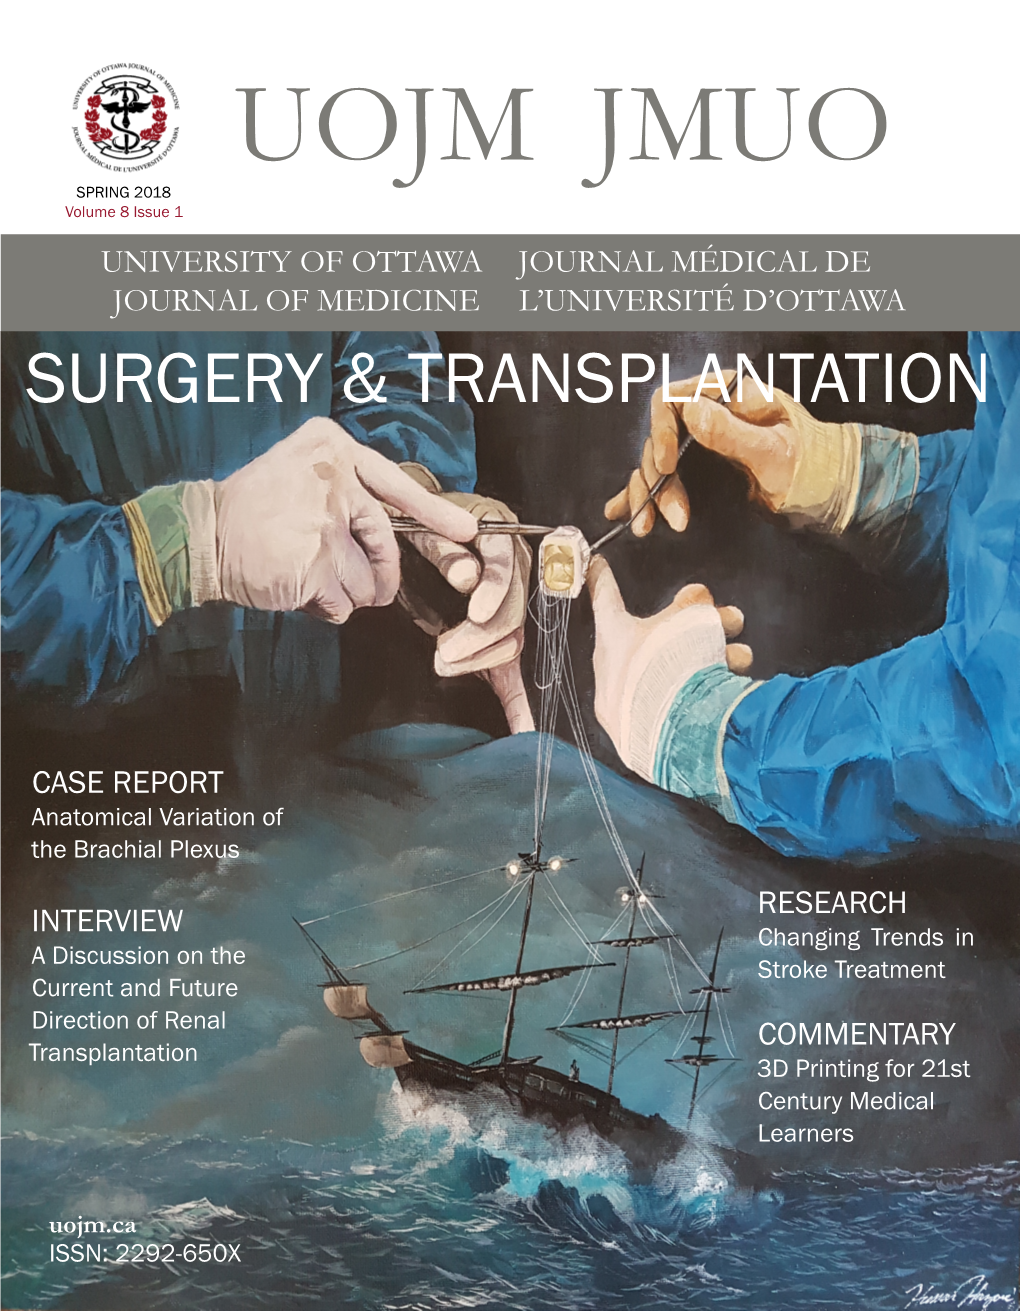 UOJM 8.1: Surgery and Transplantation Demonstrates the Incredible Evolution That Has Occurred in the Field of Surgery and Transplantation in Recent Years